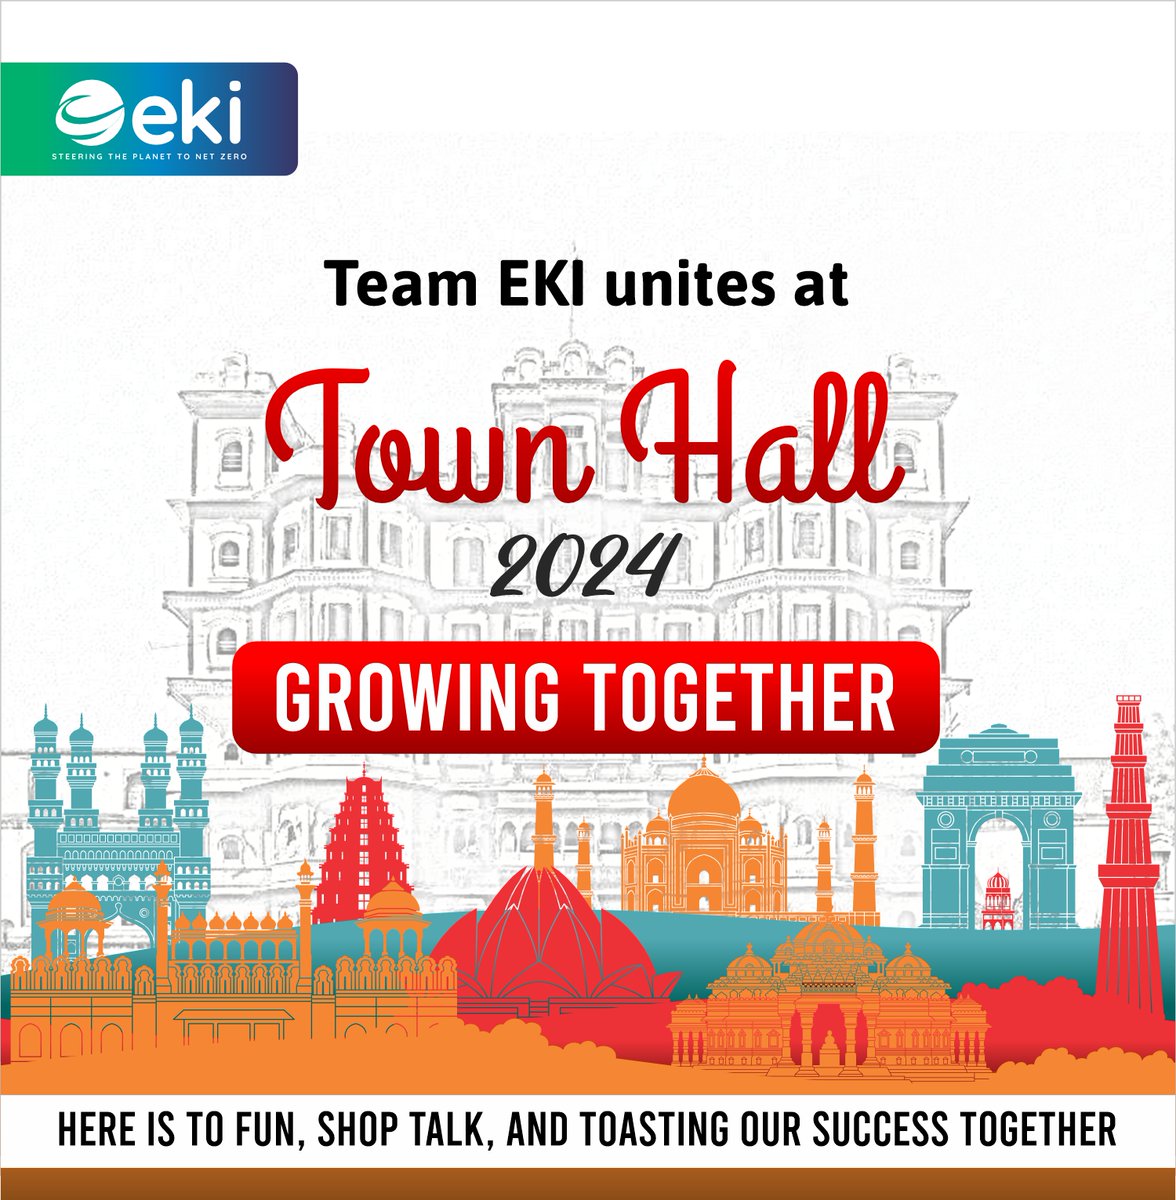 The whole EKI family will be coming together at our annual Town Hall gathering in a revelry of shared triumph, ironing bonds, and celebrating growth.

#EKIFamily #Celebration #Growth #LifeAtEKI #EKIEnergy #EKIEnergyServices #Enking